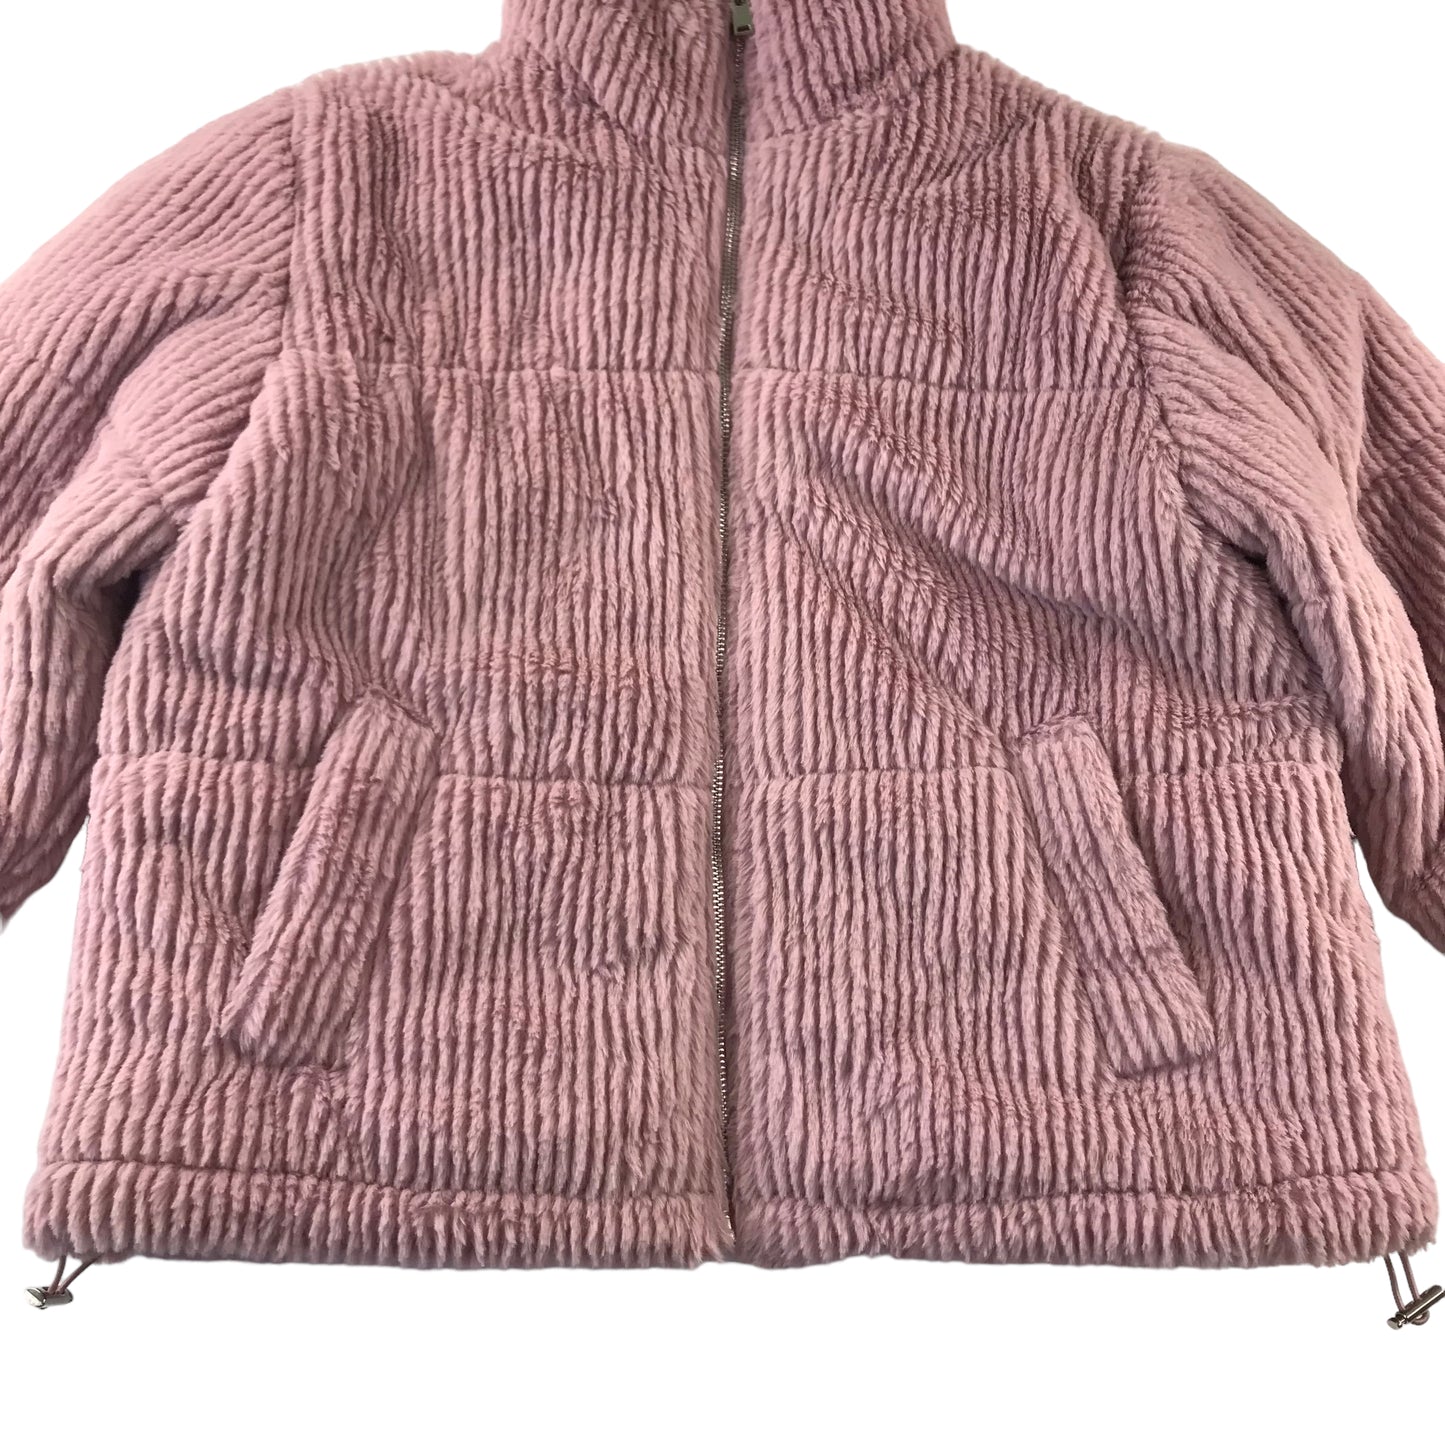 New look Jacket Woman's Size 10 Pink Faux Fur